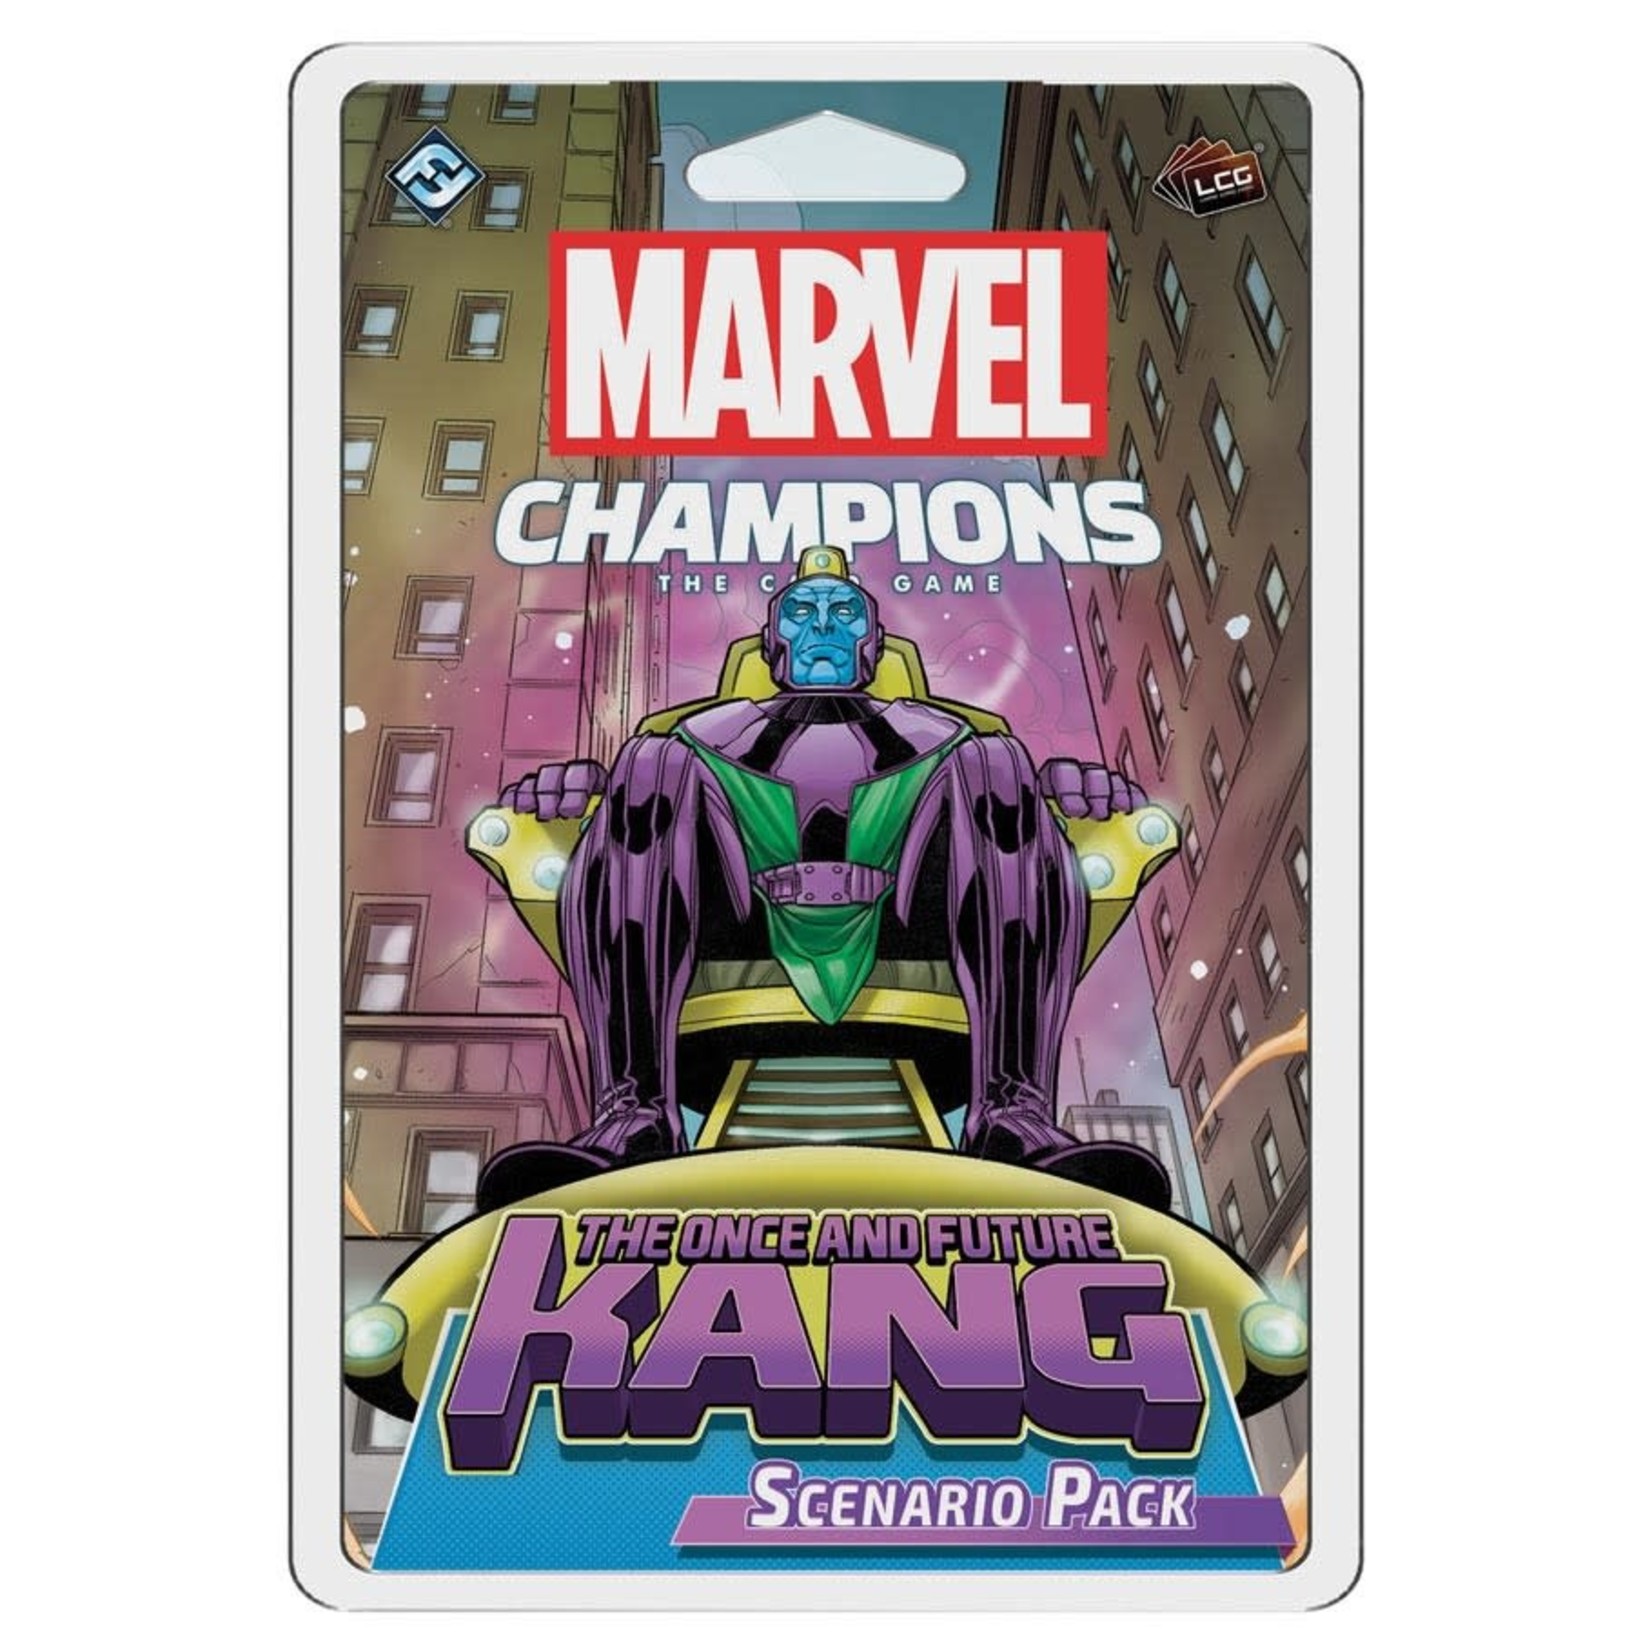 Fantasy Flight Games Marvel Champions LCG: The Once and Future Kang, Scenario Pack (Expansion)